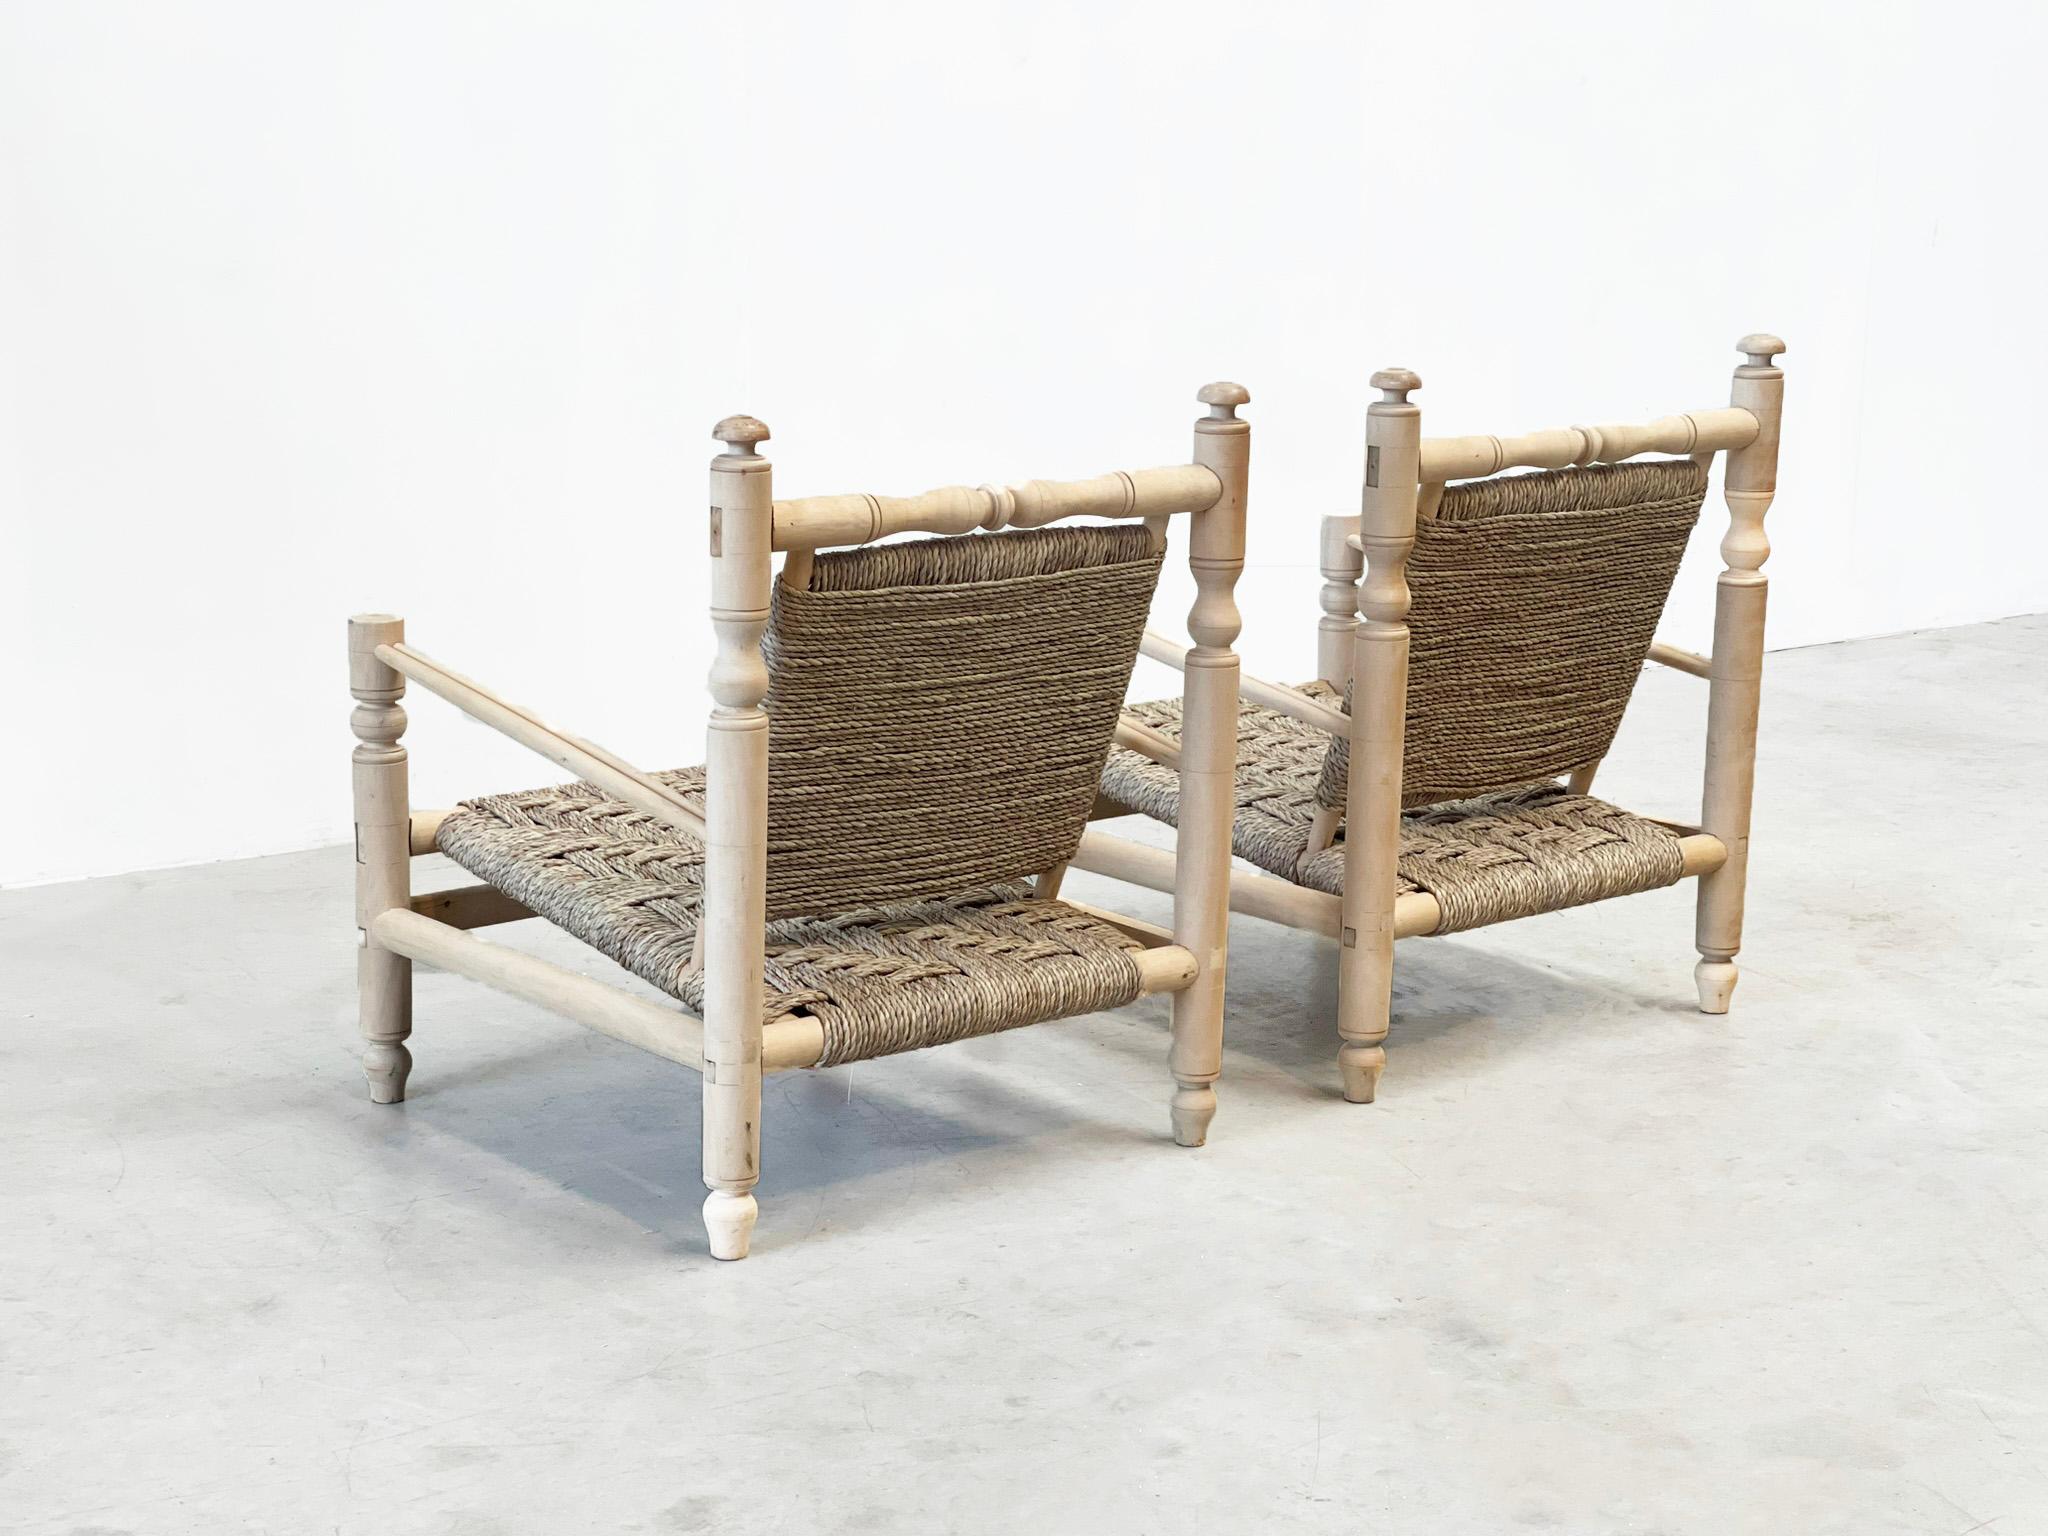 Lounge chairs by Adrien Audoux & Frida Minet 1